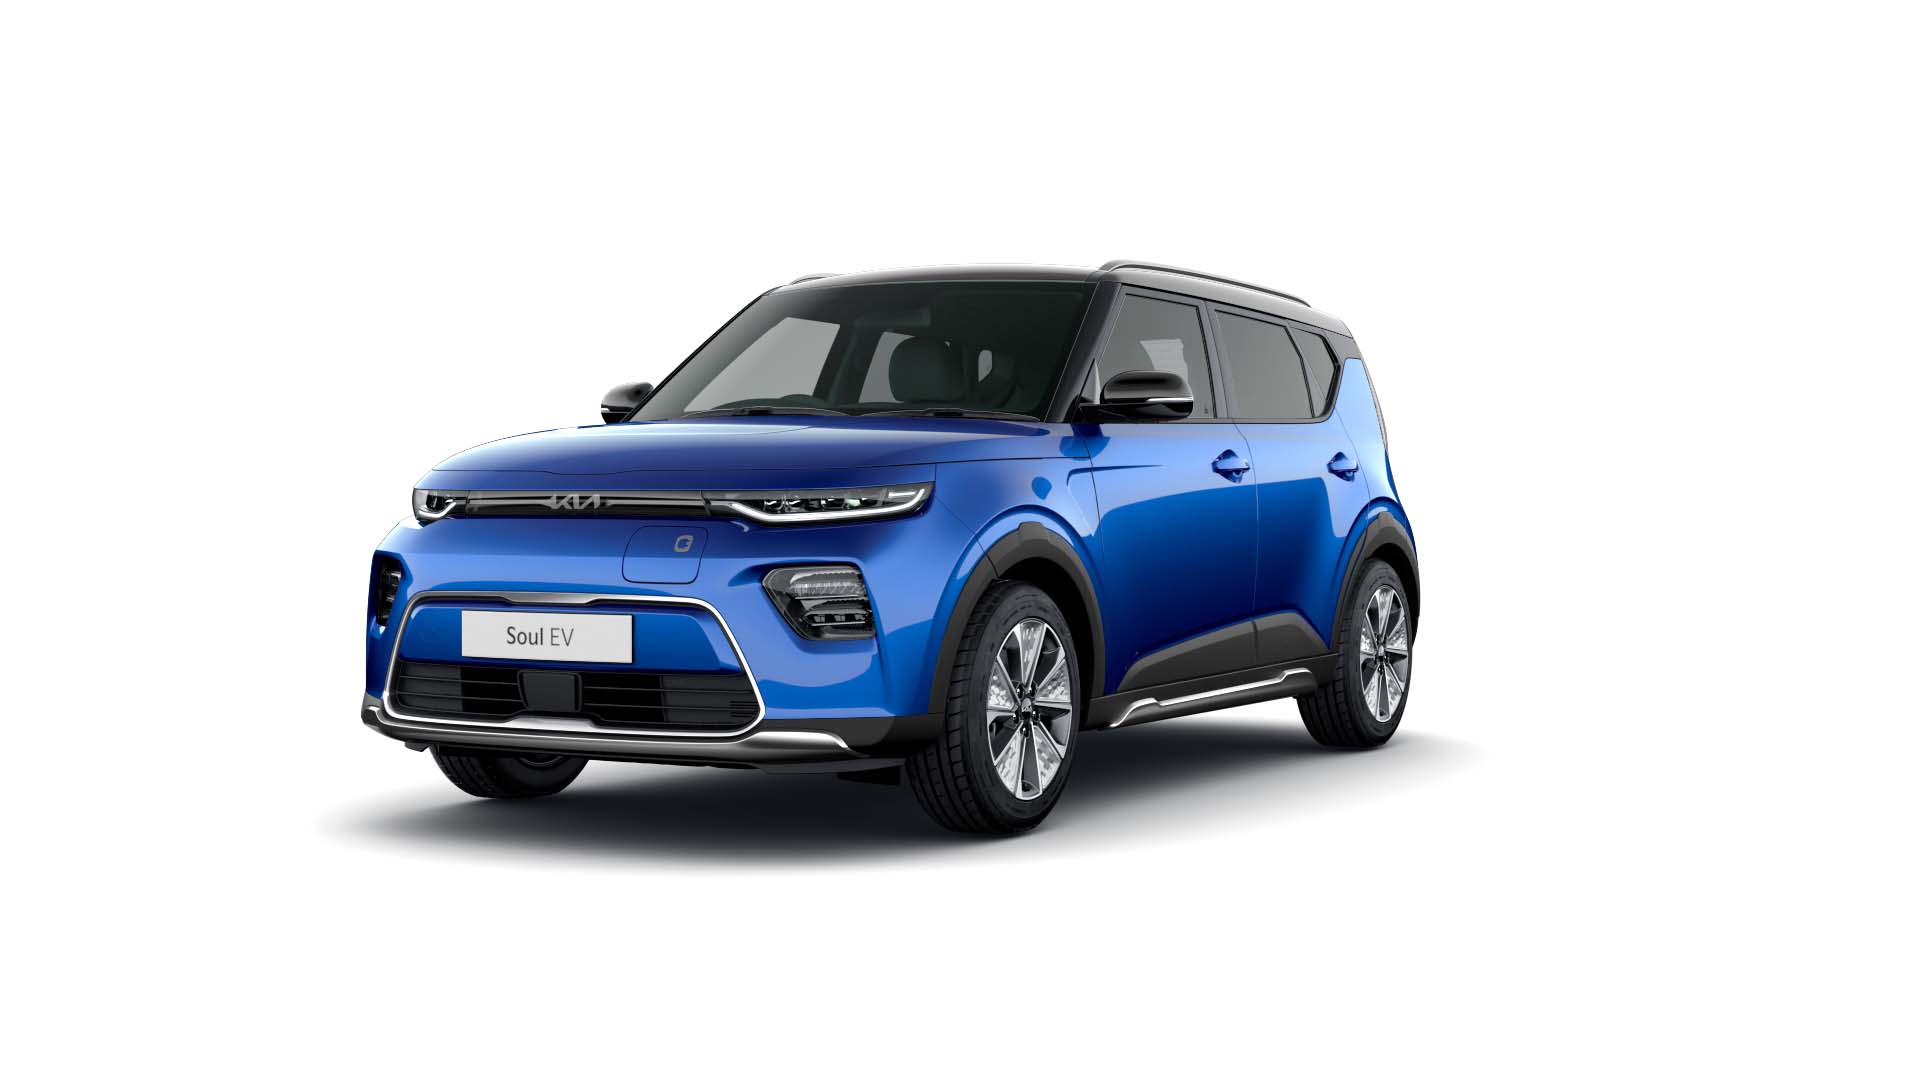 Kia UK reveals pricing and specifications for expanded Soul EV line-up